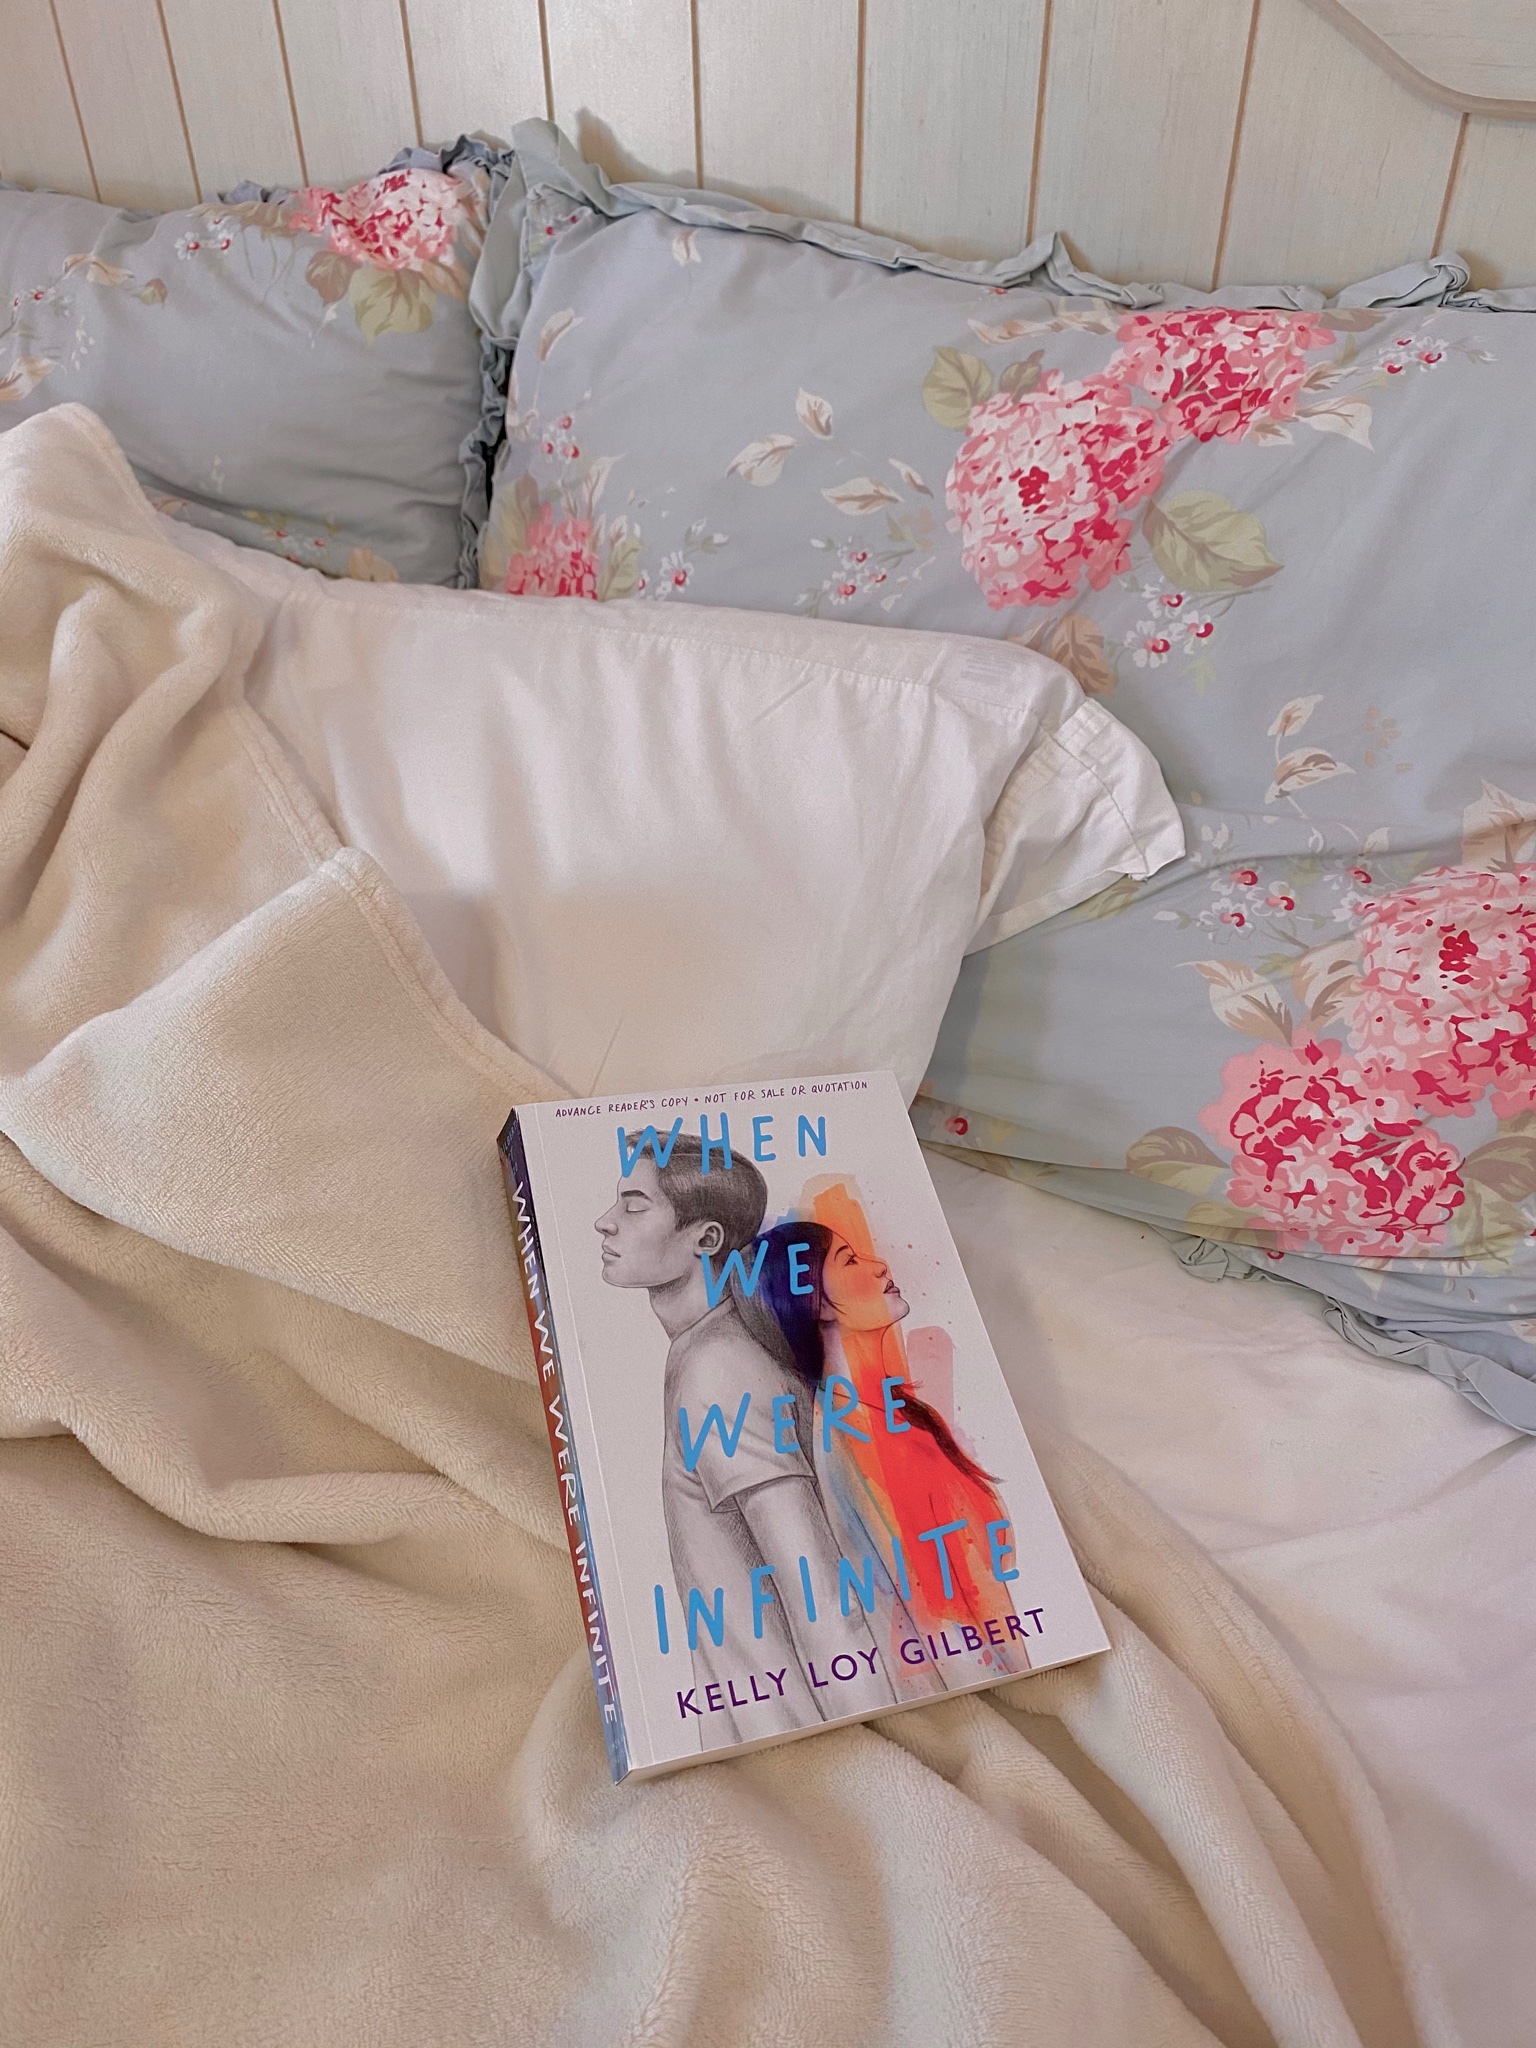 book When We Were Infinite by kelly loy gilbert sitting on top of off white blanket on and white pillow. behind are two blue pillows with pink flowers and a beige headboard